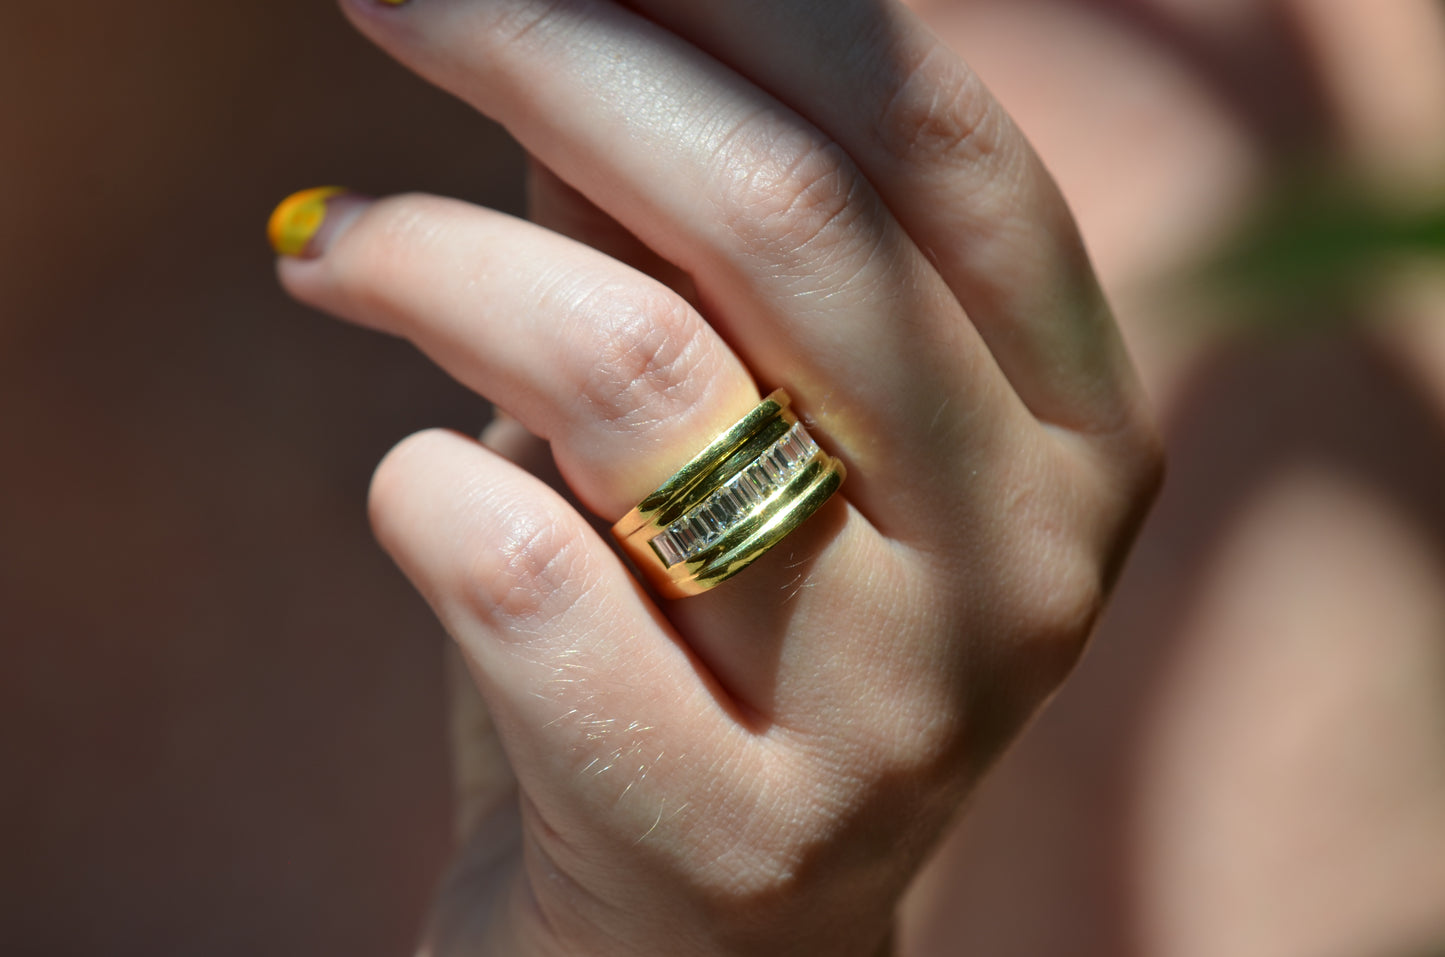 Bold Channel Baguette Ring